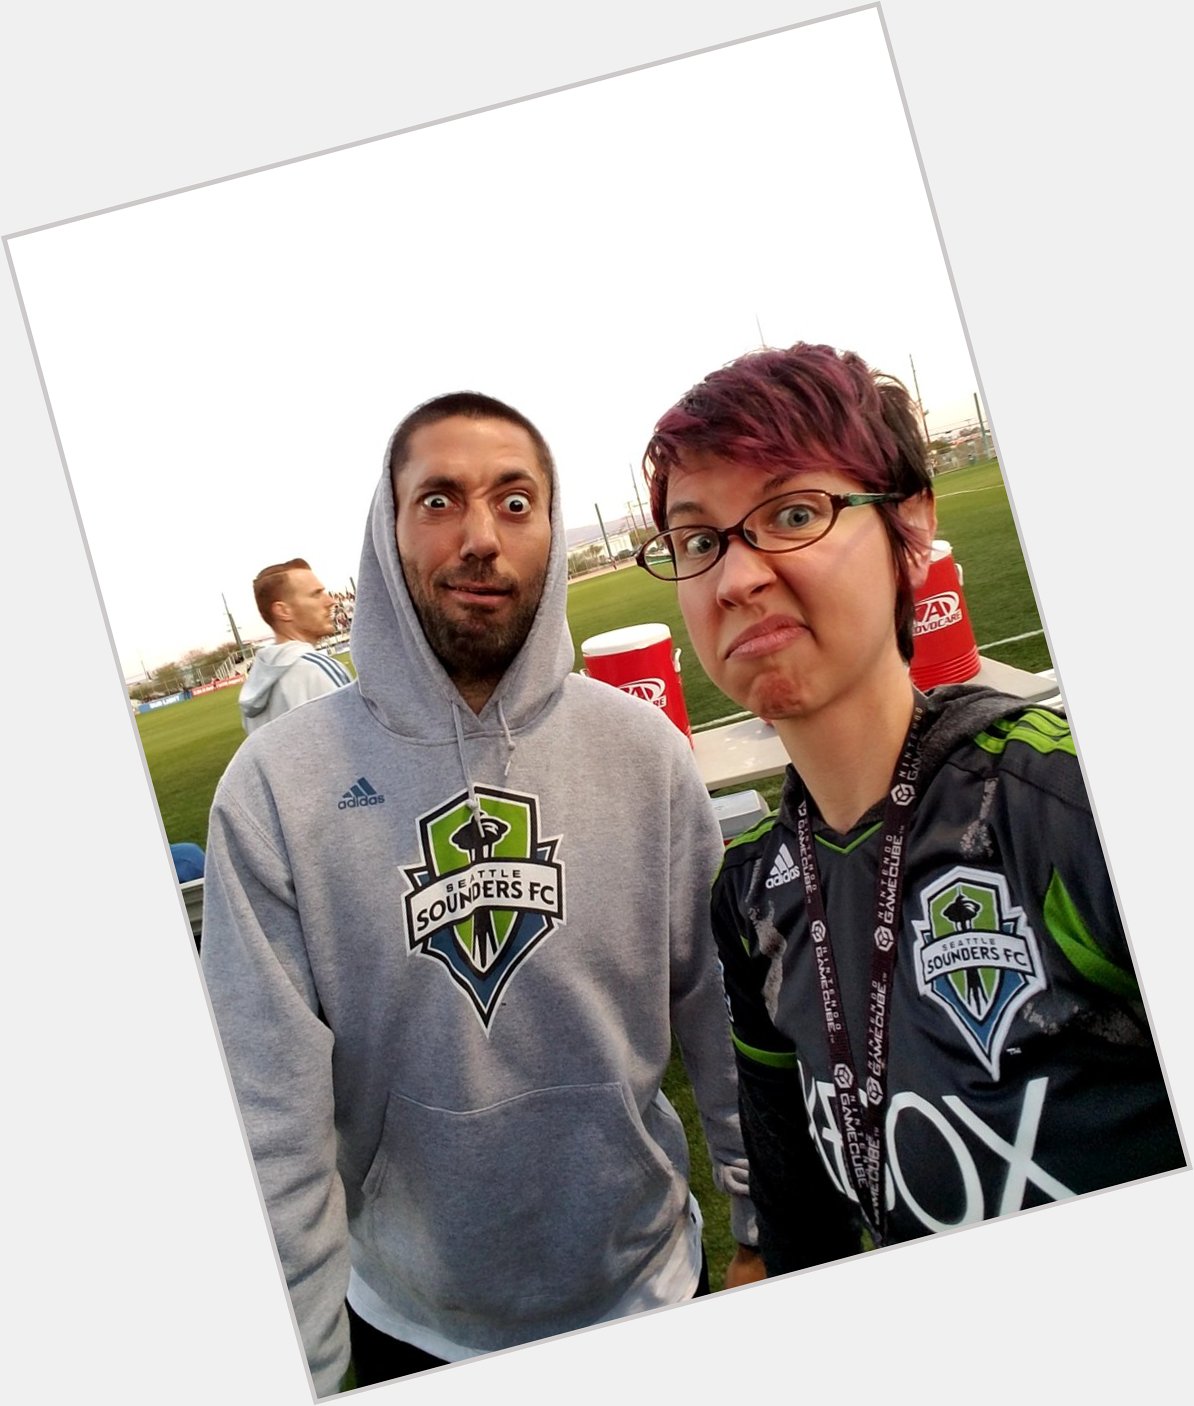 Oh wow, happy birthday to Clint Dempsey who makes the best faces and is extremely good at the game of soccer 